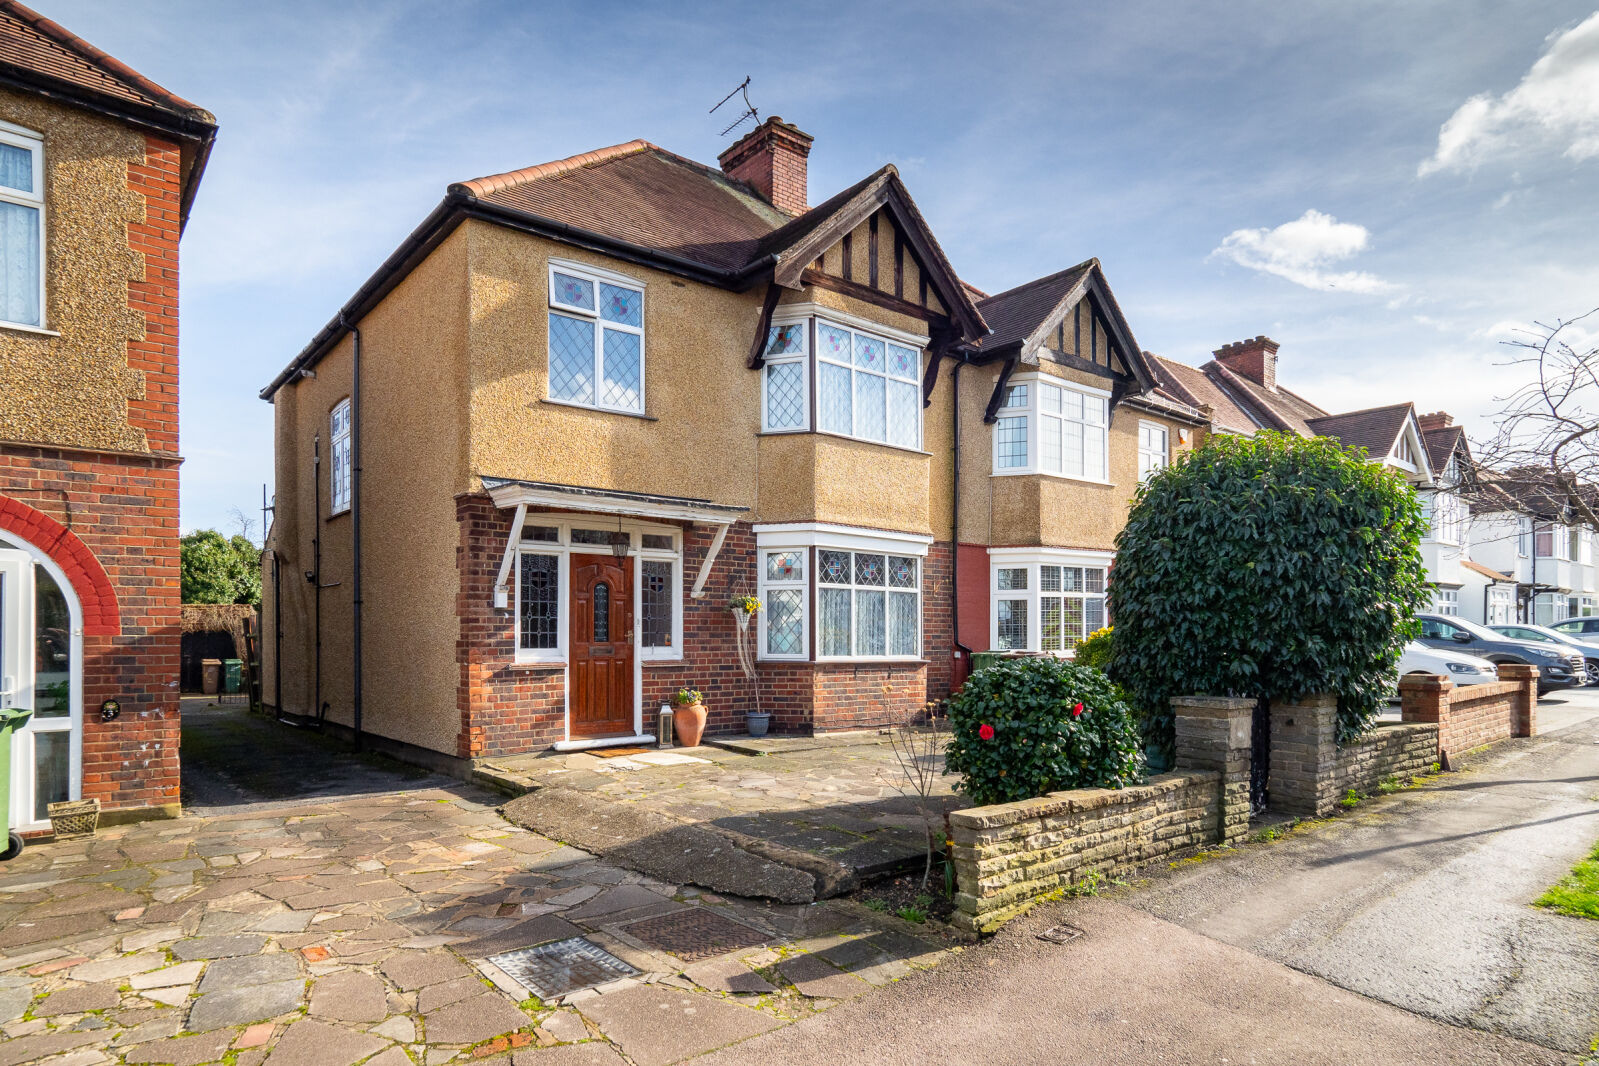 3 bedroom semi detached house for sale Senhouse Road, Cheam, SM3, main image